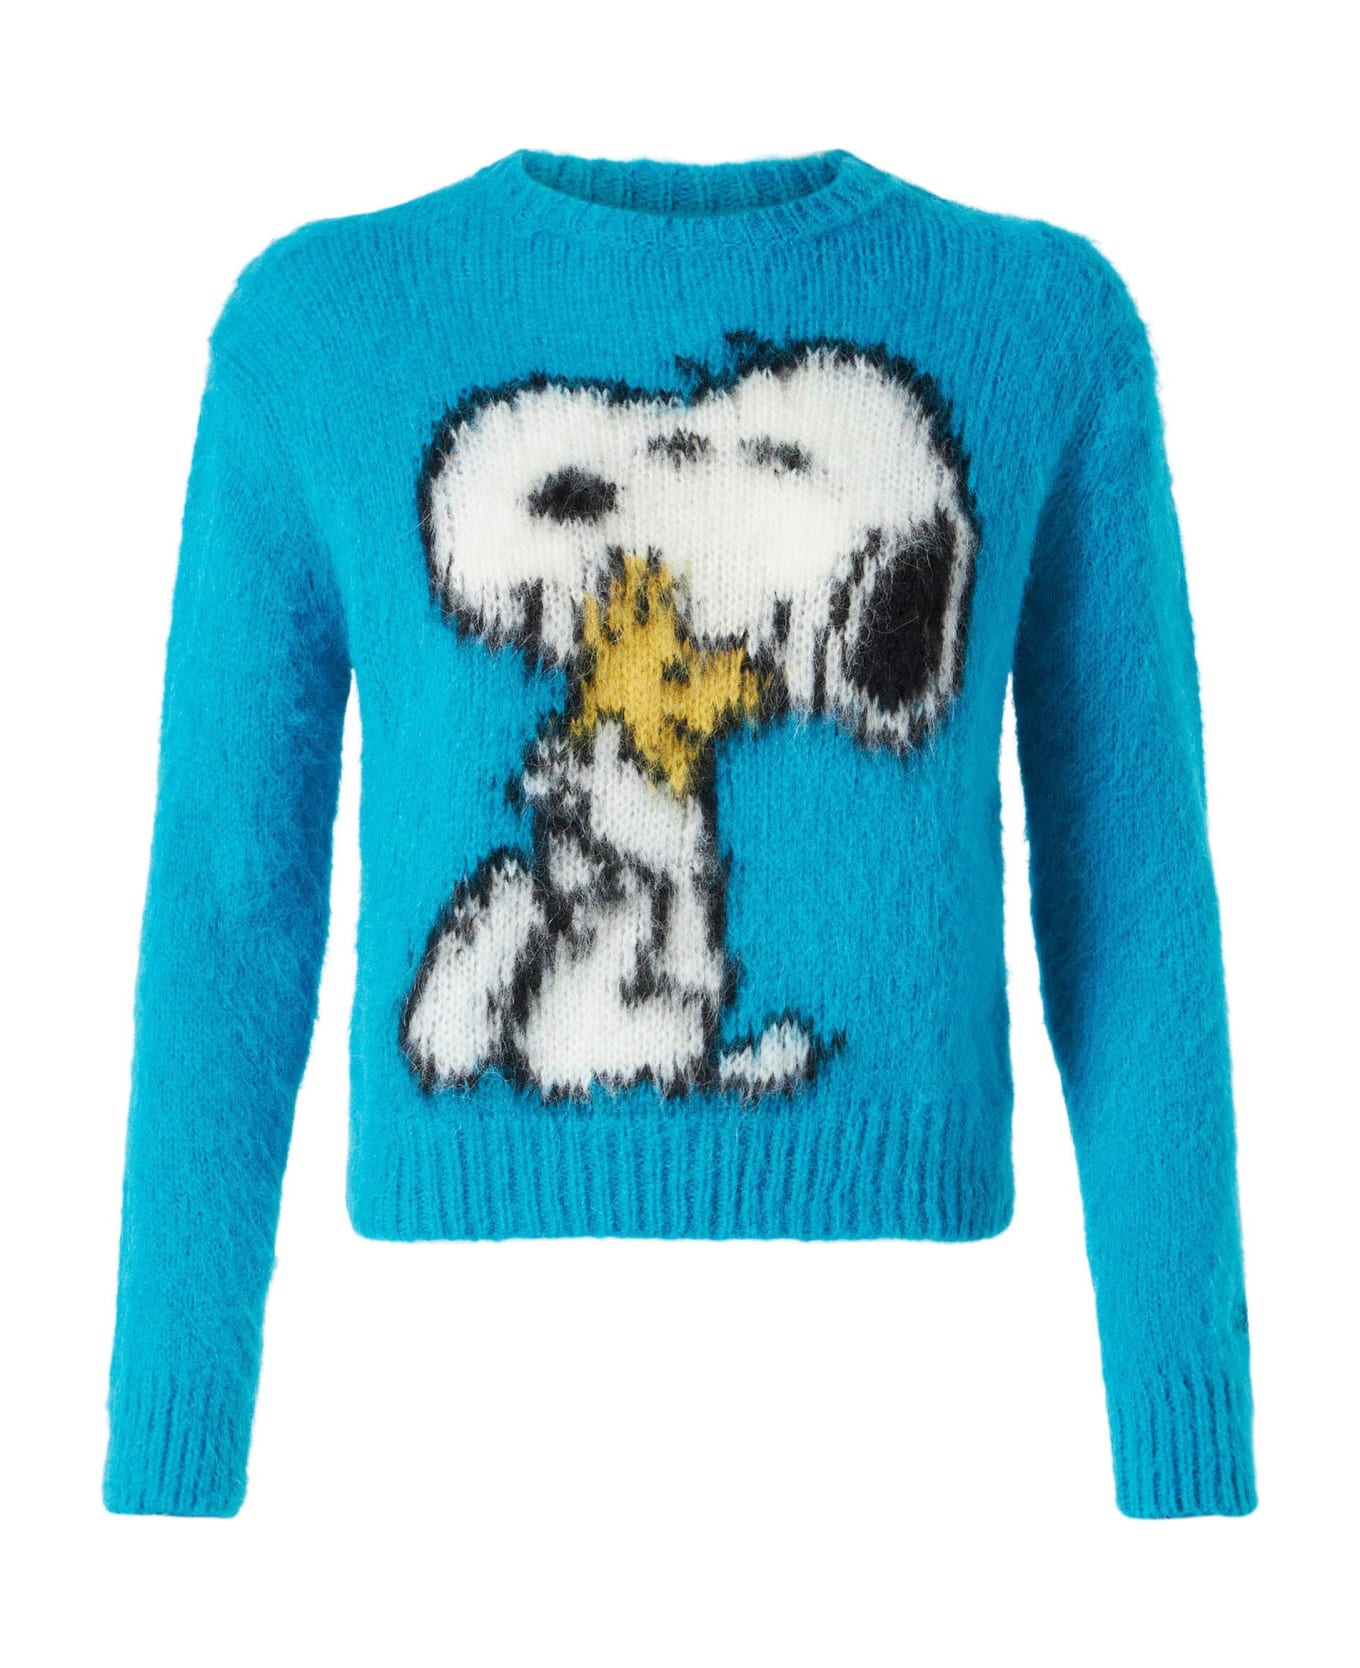 MC2 Saint Barth Woman Brushed Sweater With Snoopy Print | Snoopy - Peanuts Special Edition - BLUE